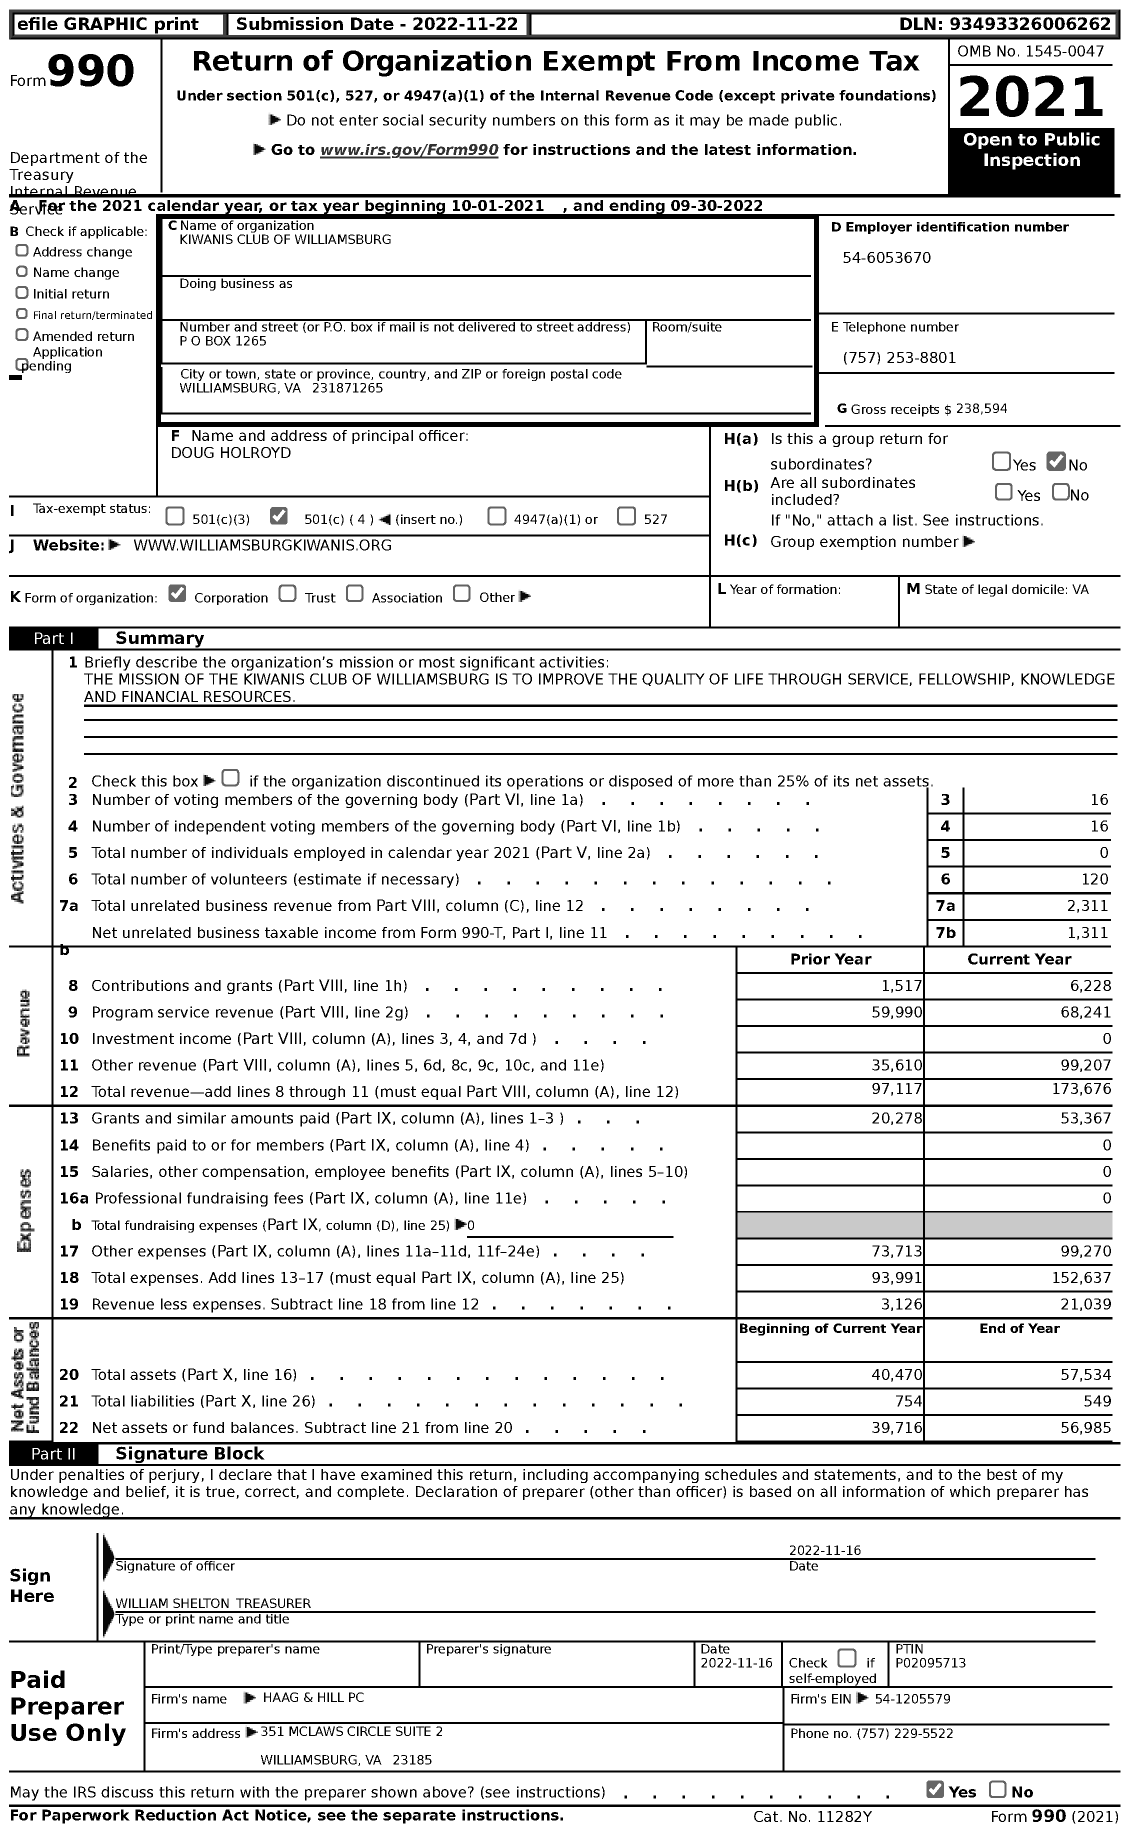 Image of first page of 2021 Form 990 for Kiwanis International - Attention Bill Shelton Treasurer